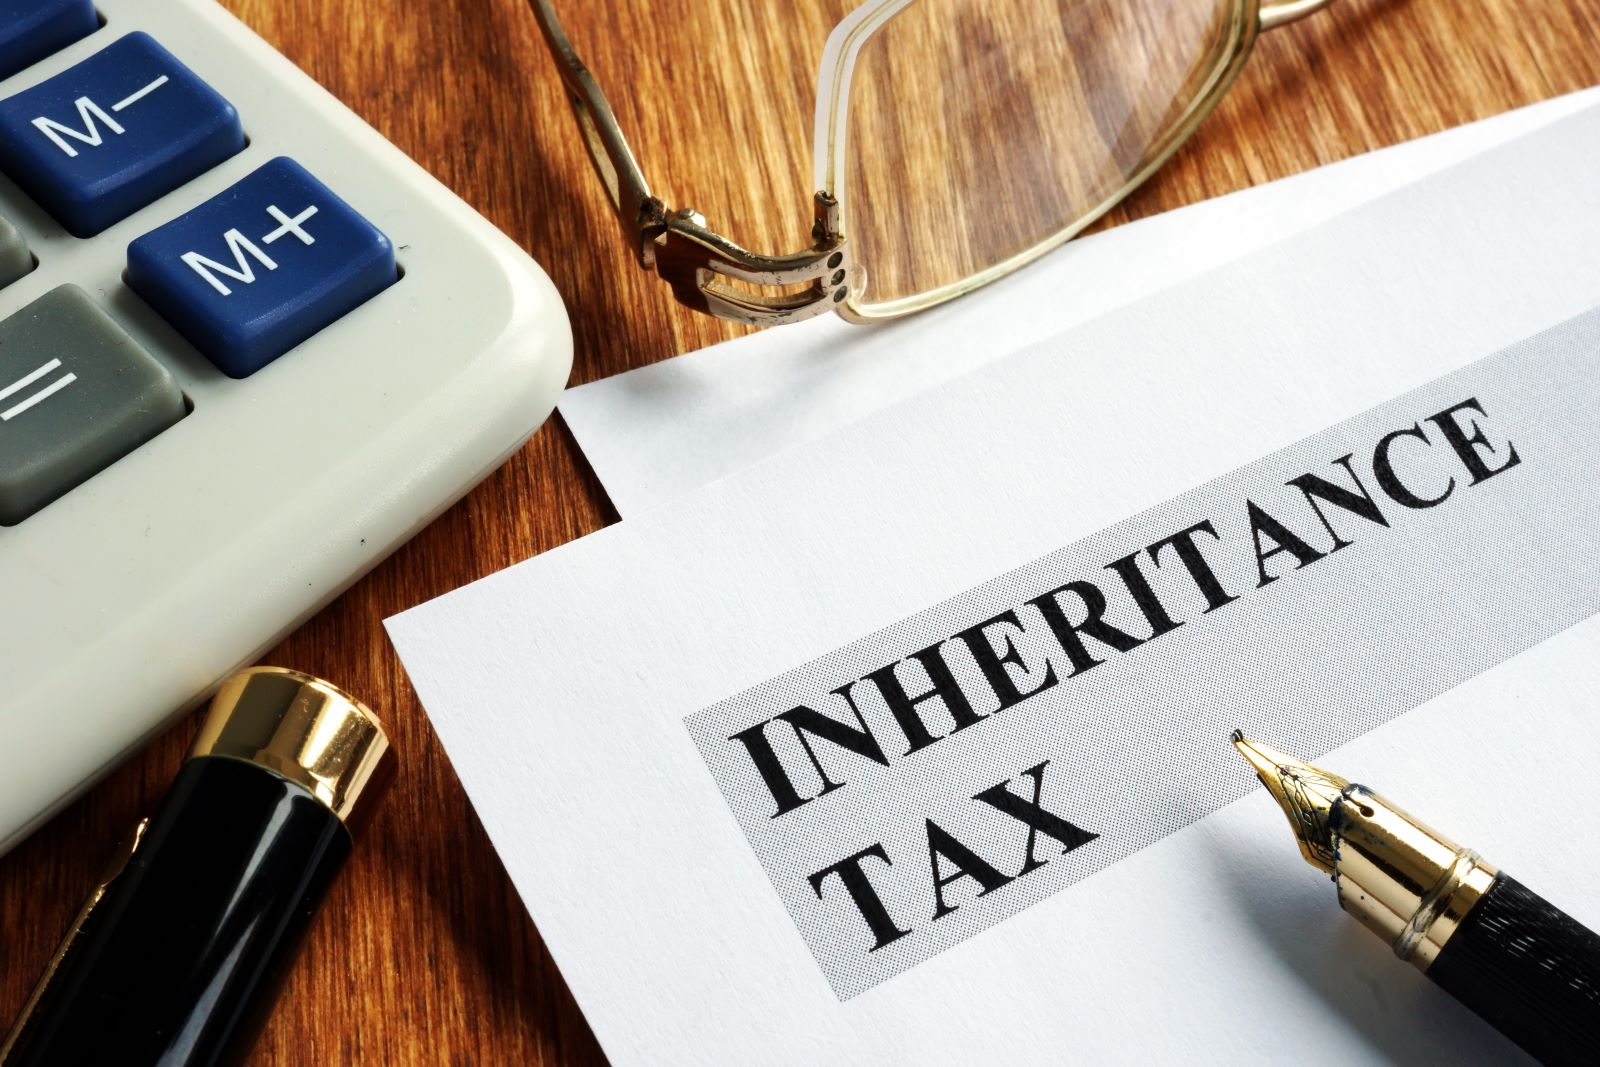 Image Credit: Shutterstock / Vitalii Vodolazskyi  <span>Inheritance Tax: Currently, White families are more likely to receive inheritances than Black or Hispanic families. The proposed budget would limit certain tax exemptions related to inheritances, aiming for a more even playing field.</span>